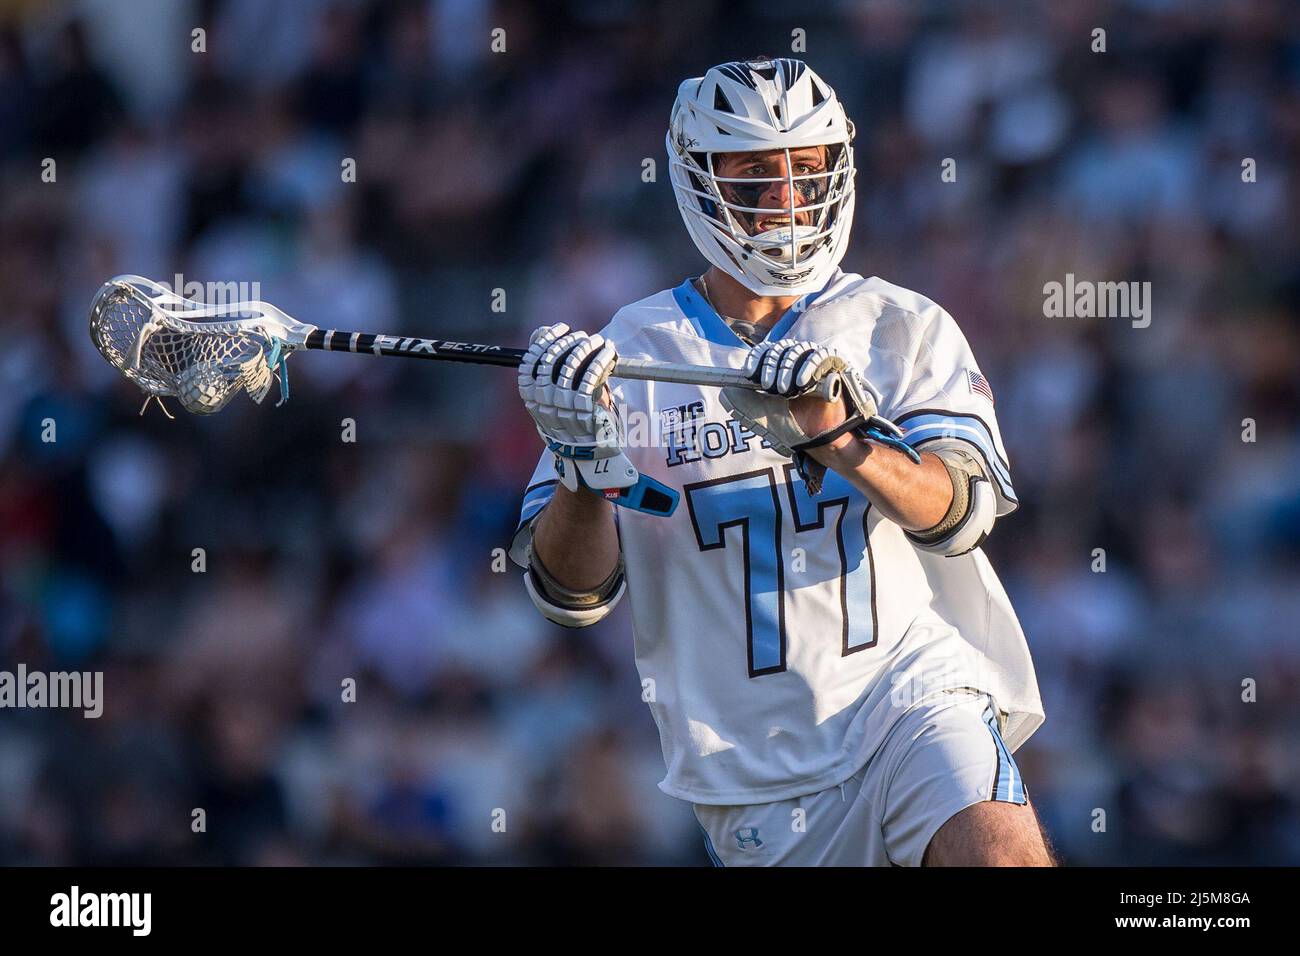 April 23, 2022: Johns Hopkins defender/midfielder Hunter Jaronski (77) during the ncaa men's lacrosse regular season finale between the Maryland Terrapins and the Johns Hopkins Blue Jays at Homewood Field in Baltimore, Maryland Photographer: Cory Royster Stock Photo